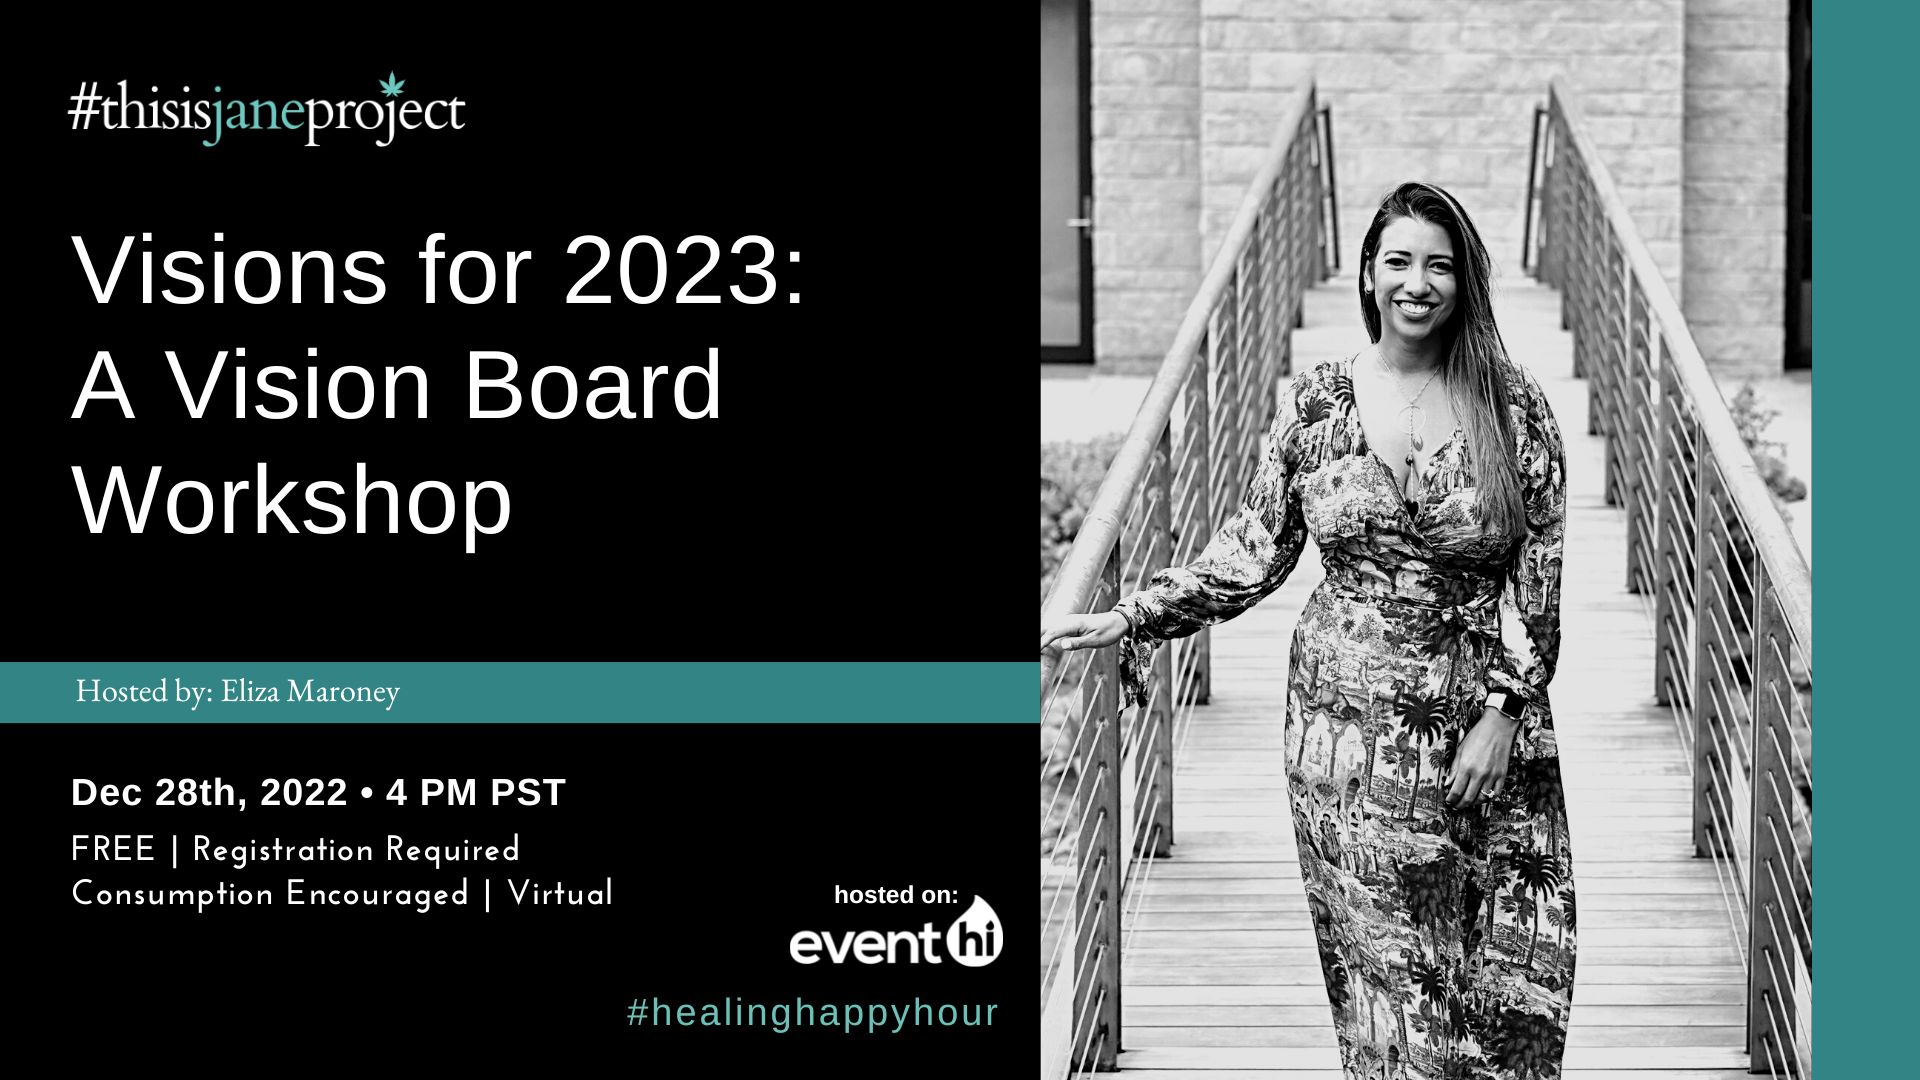 Healing Happy Hour: Visions for 2023, A Vision Board Workshop